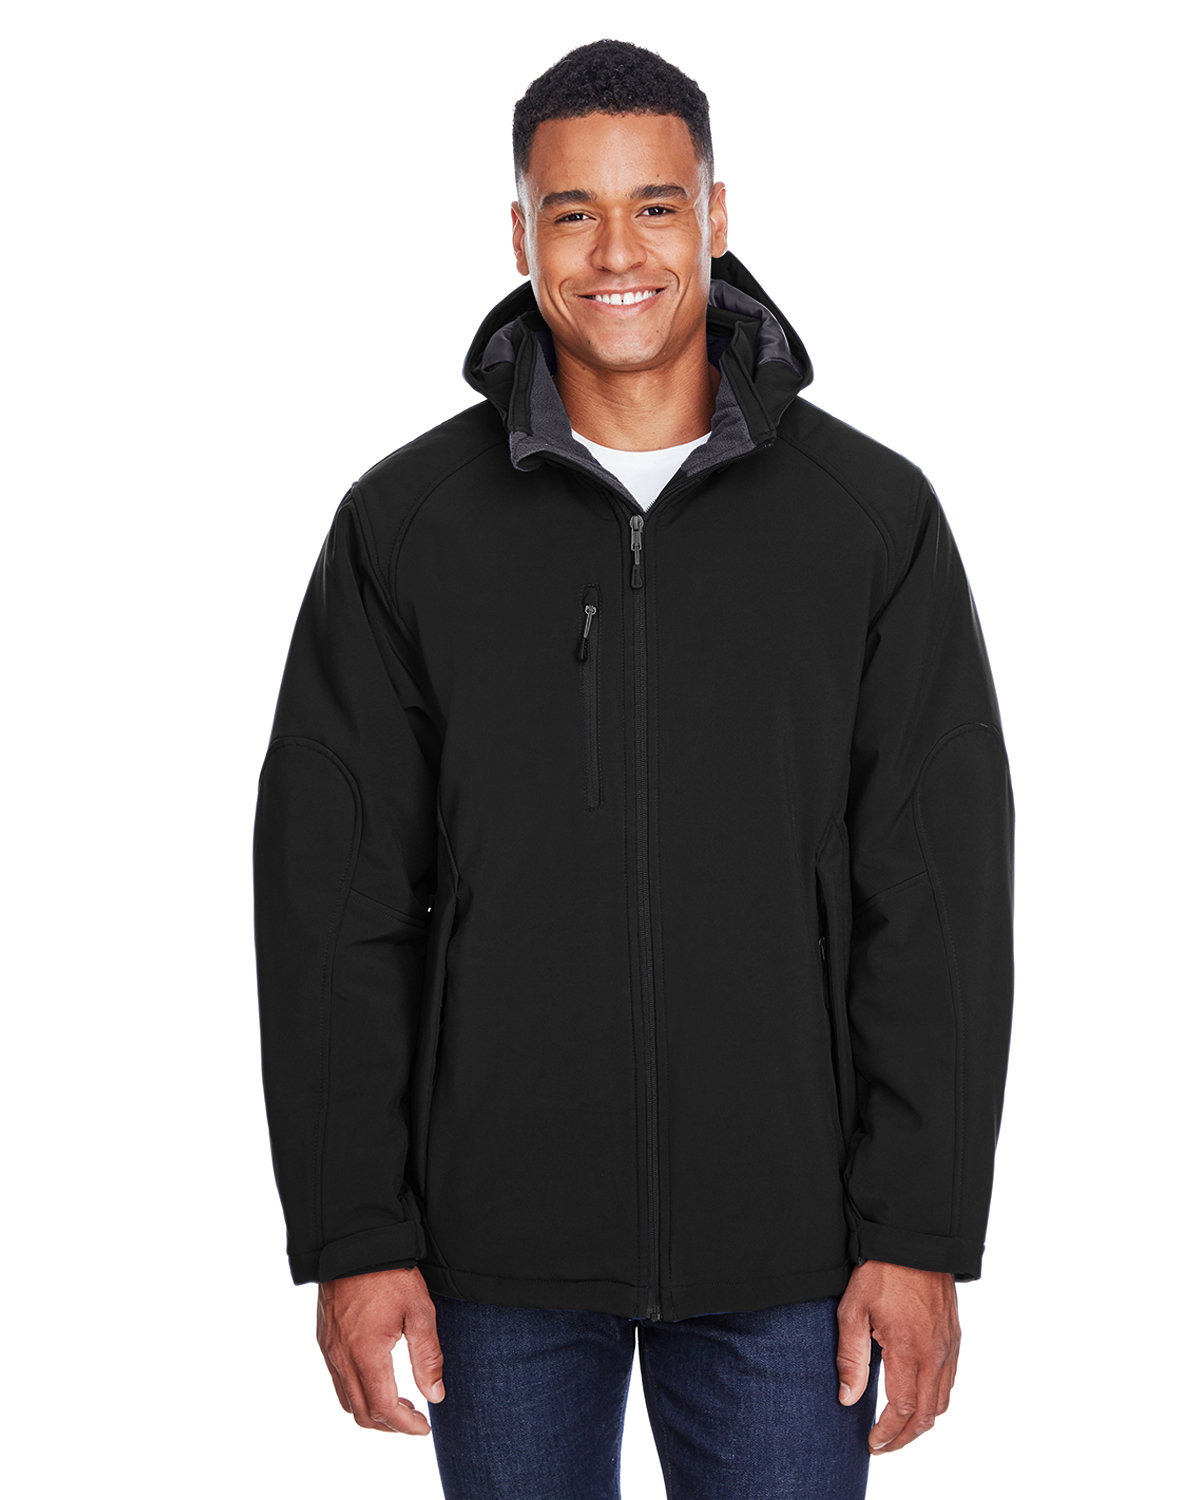 North End Men's Glacier Insulated Three-Layer Fleece Bonded Soft Shell Jacket with Detachable Hood BLACK 